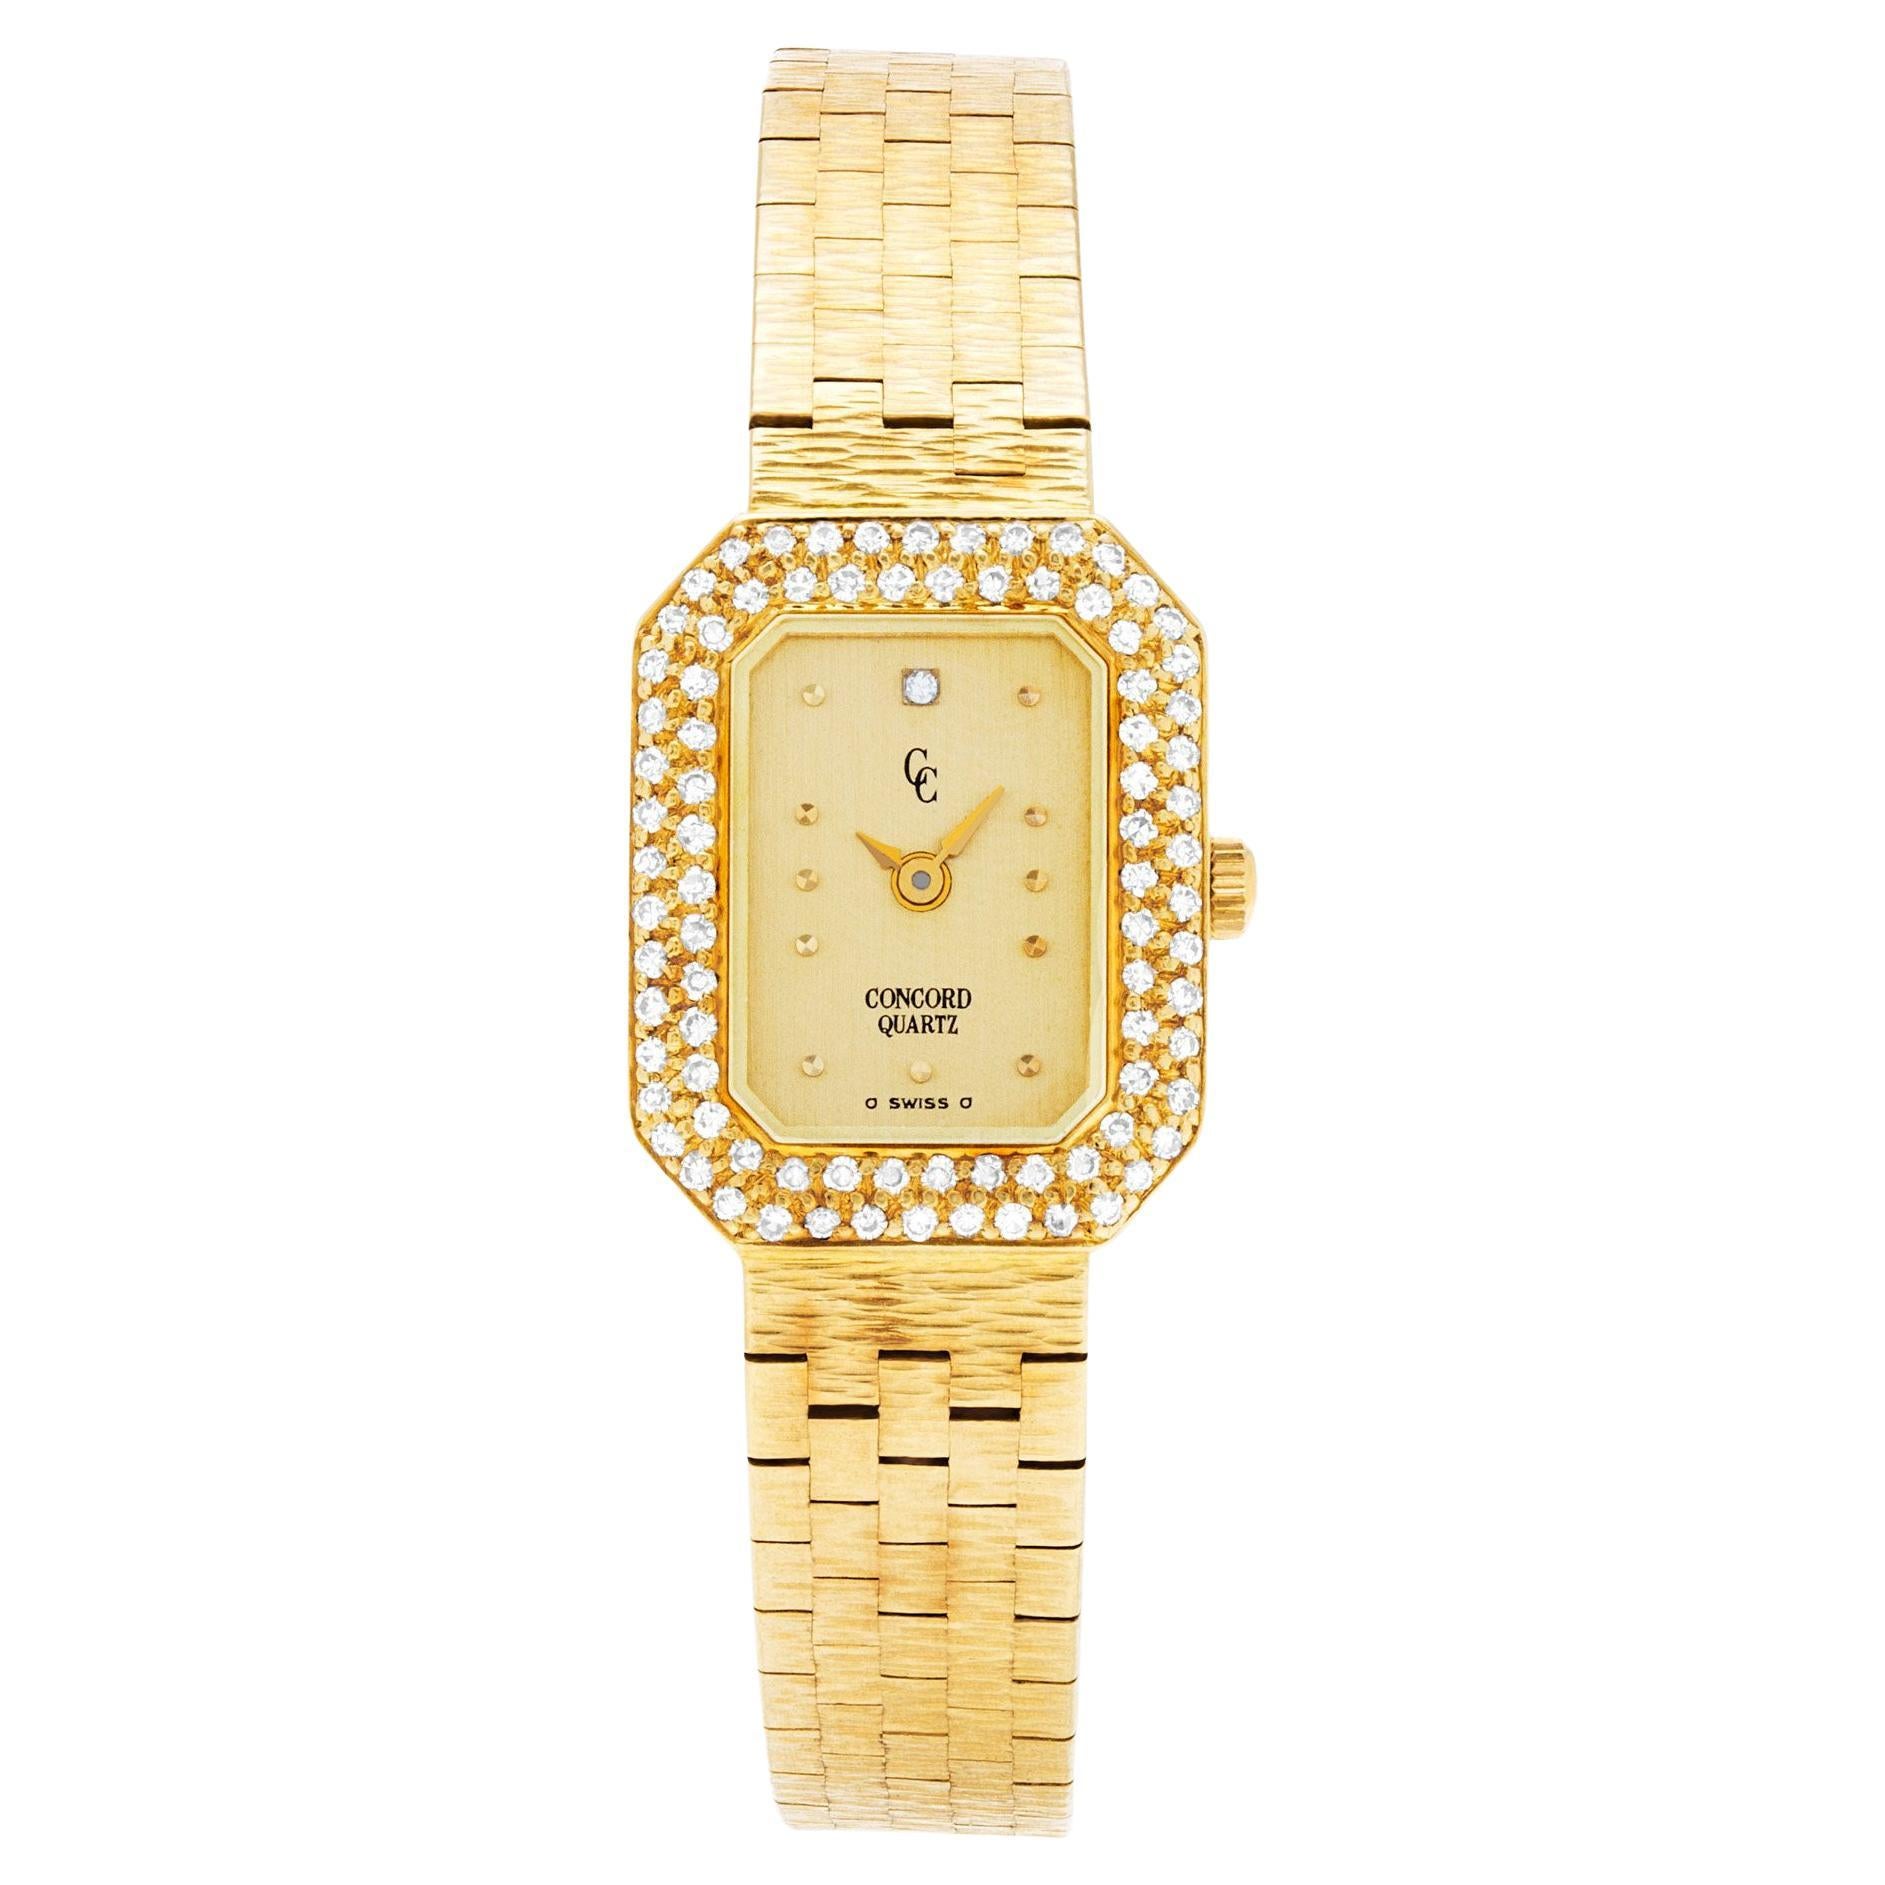 Concord Classic Watch in 18k Yellow Gold with Diamond Bezel, Quartz, Champagne